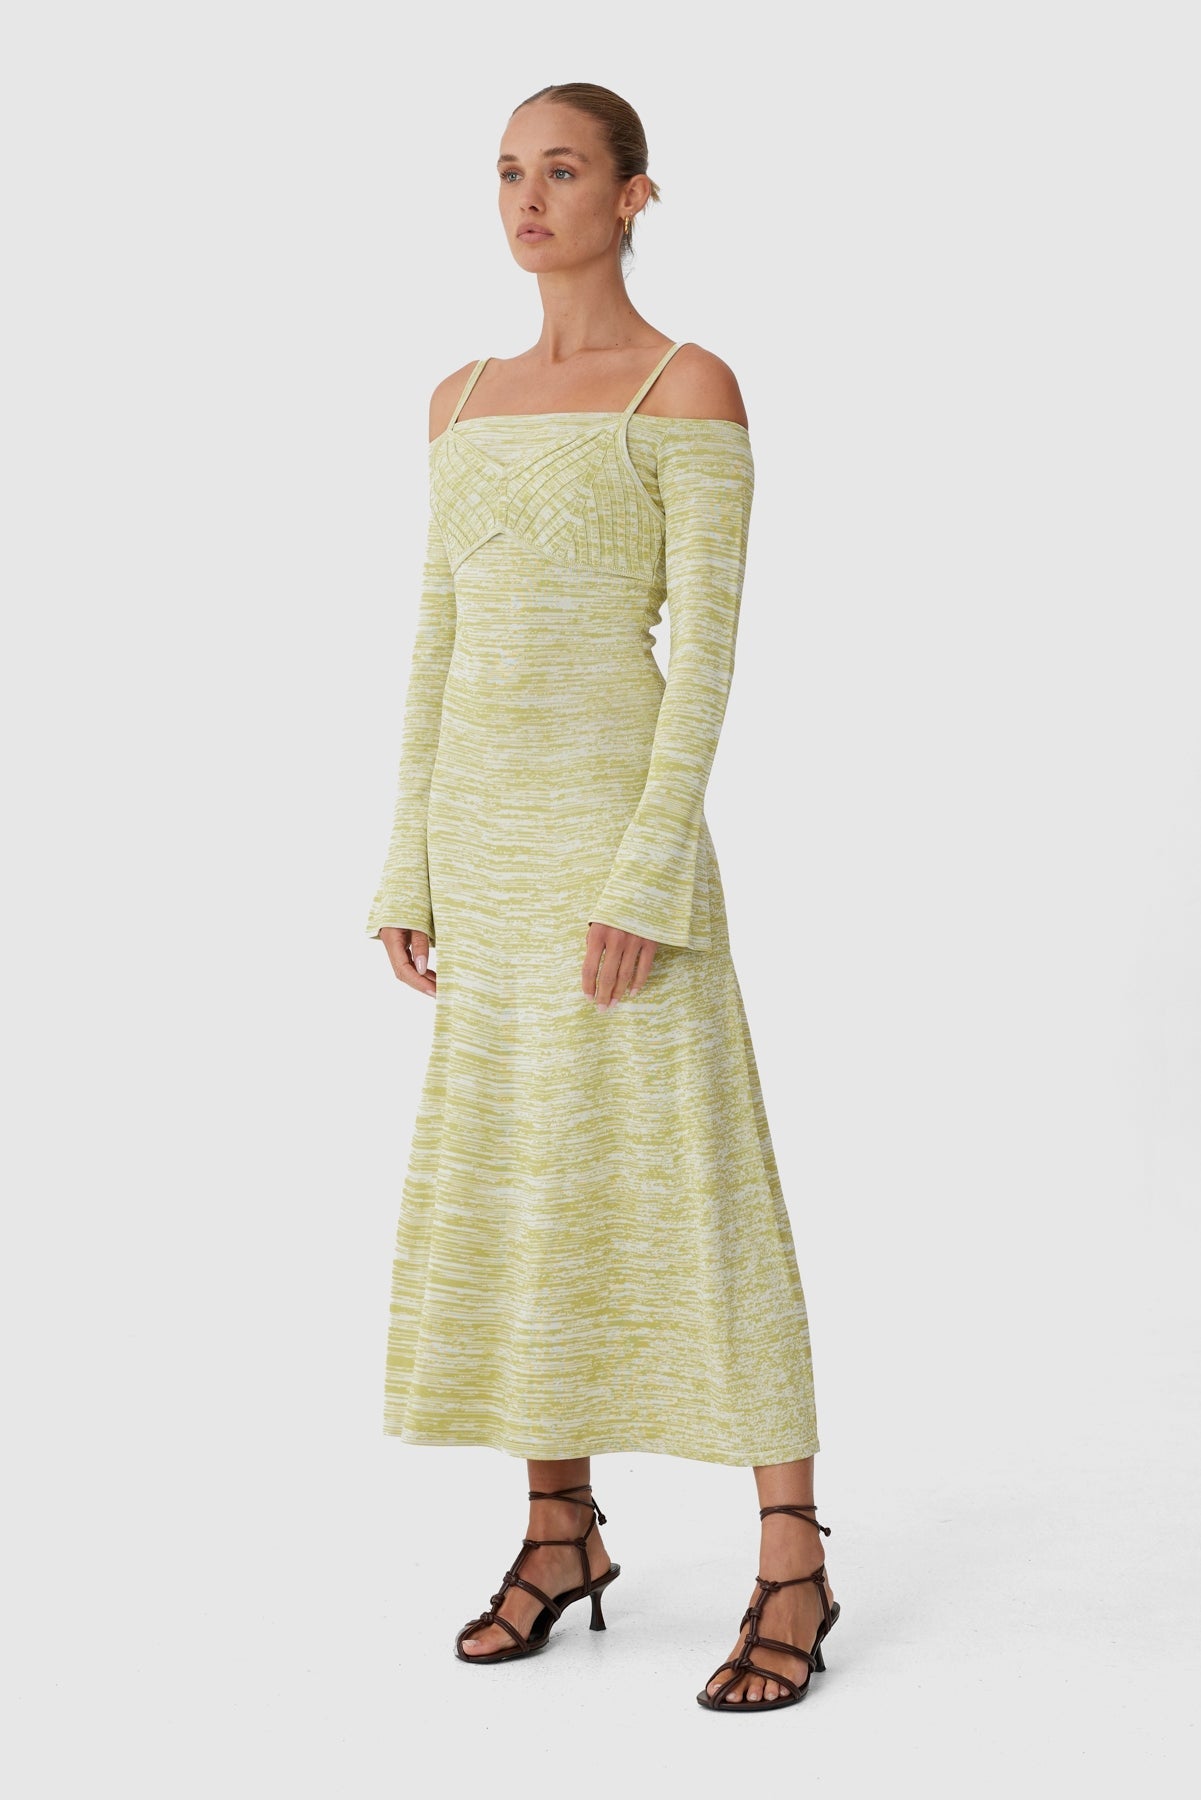 C/MEO Collective - Take Care Dress - Green Marle